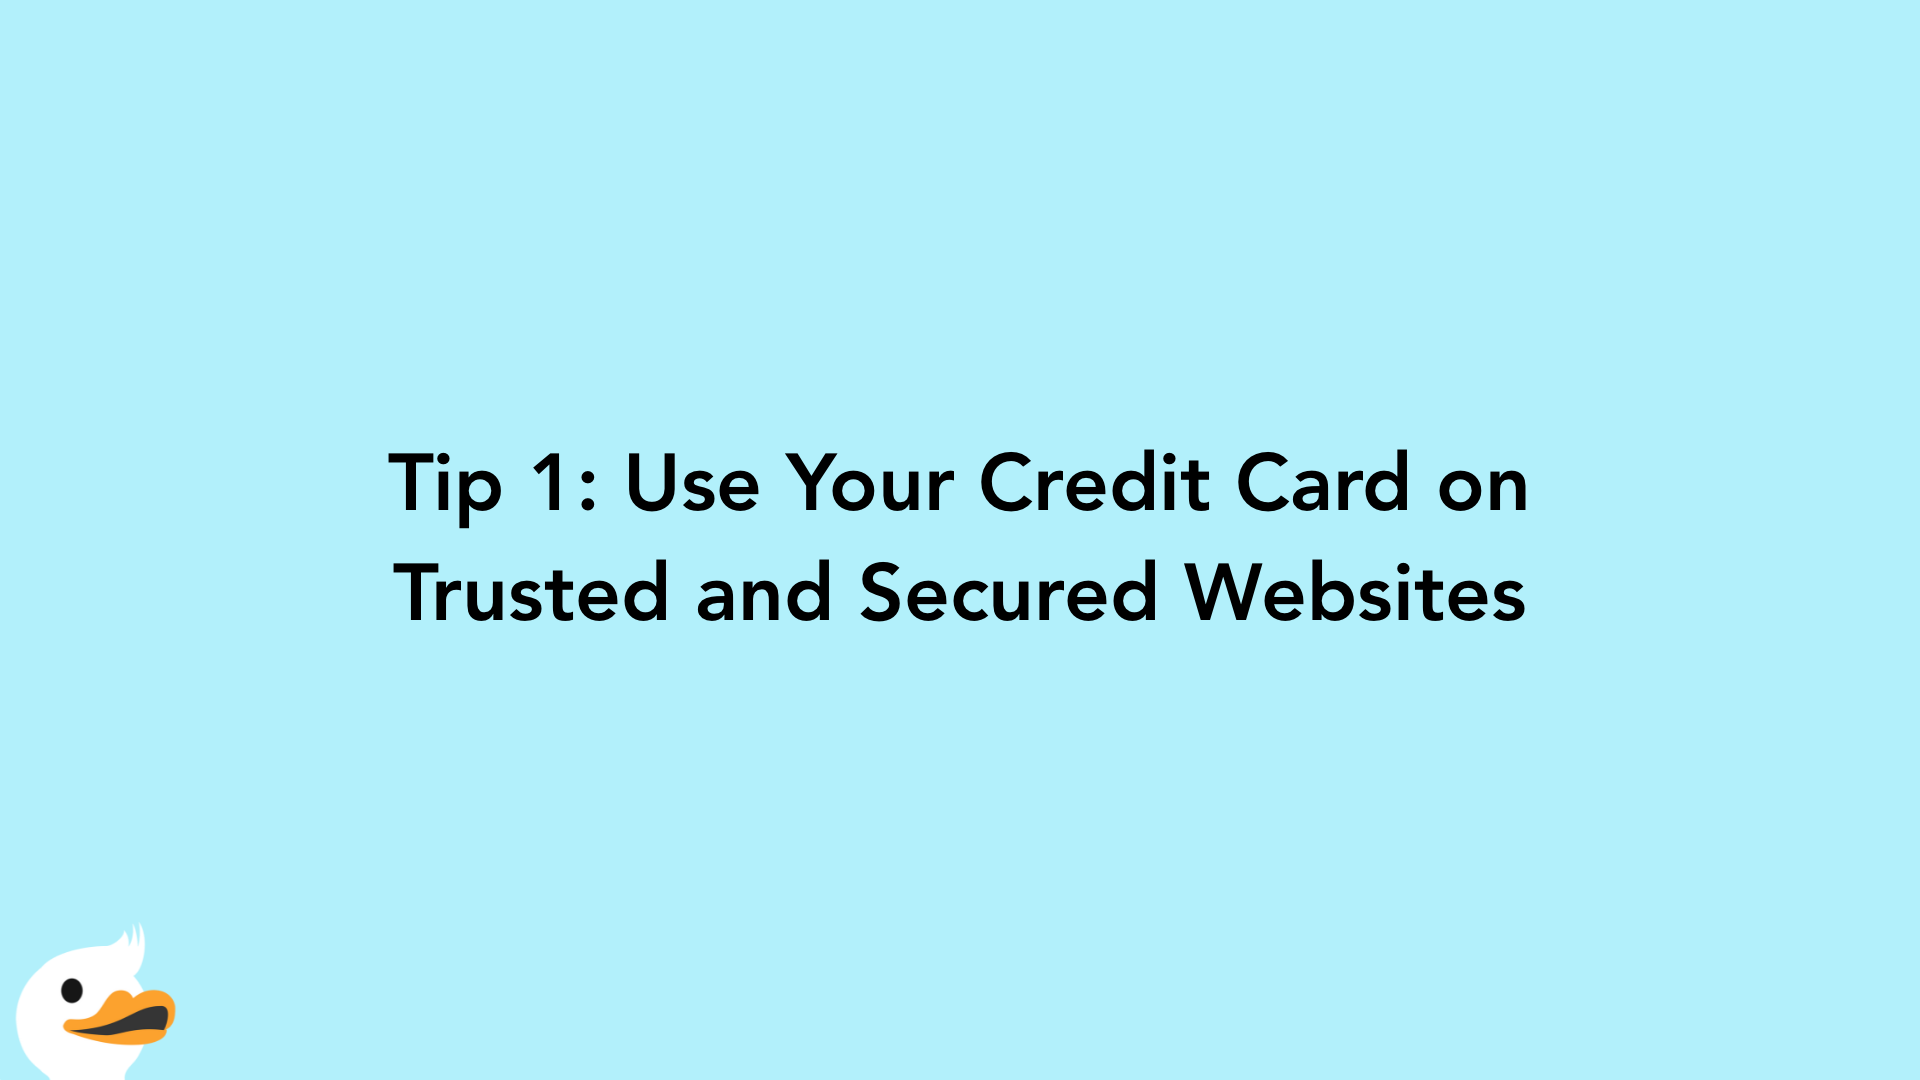 Tip 1: Use Your Credit Card on Trusted and Secured Websites